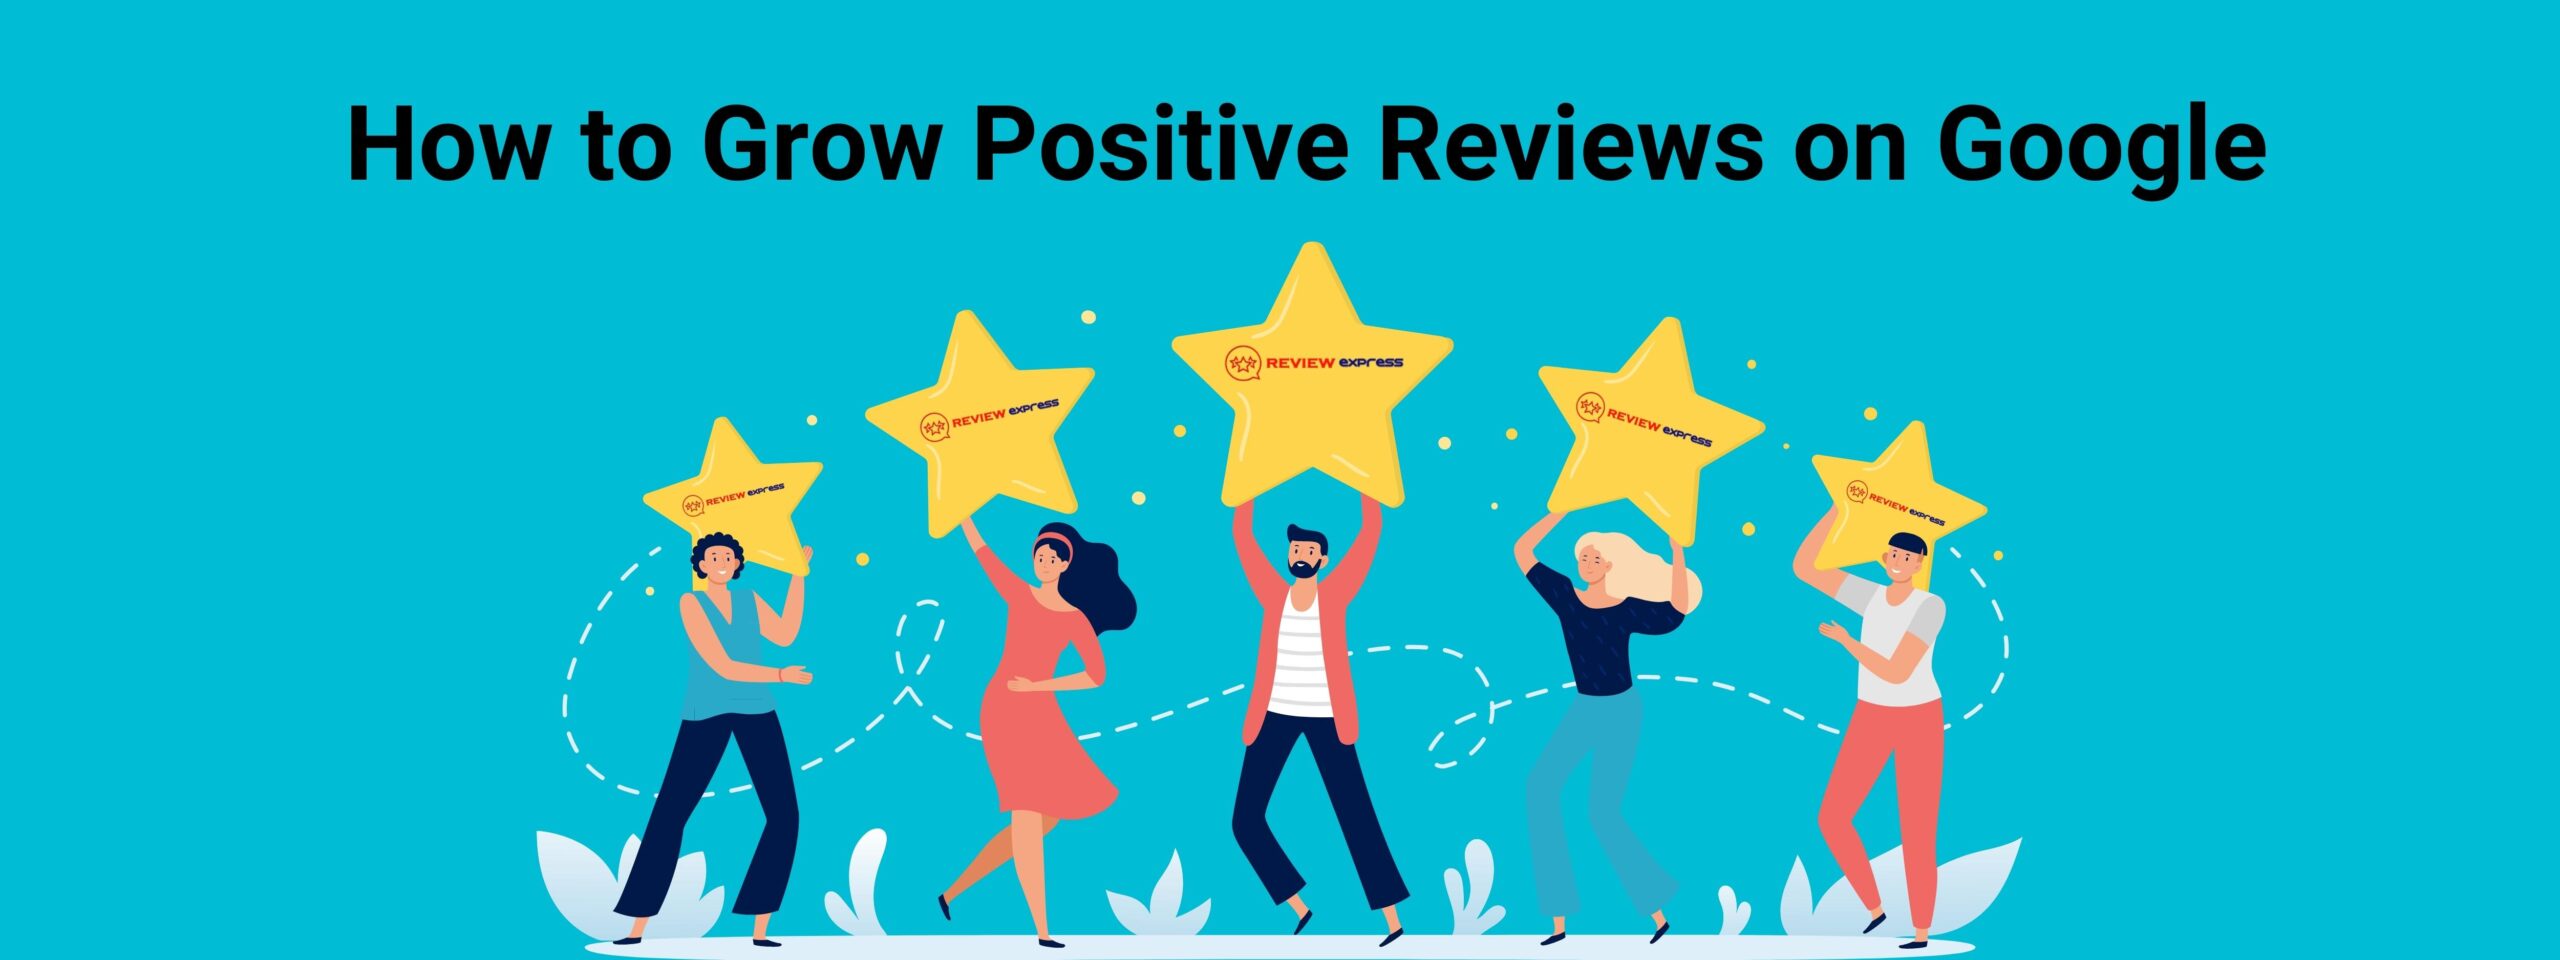 How to Grow Positive Reviews on Google